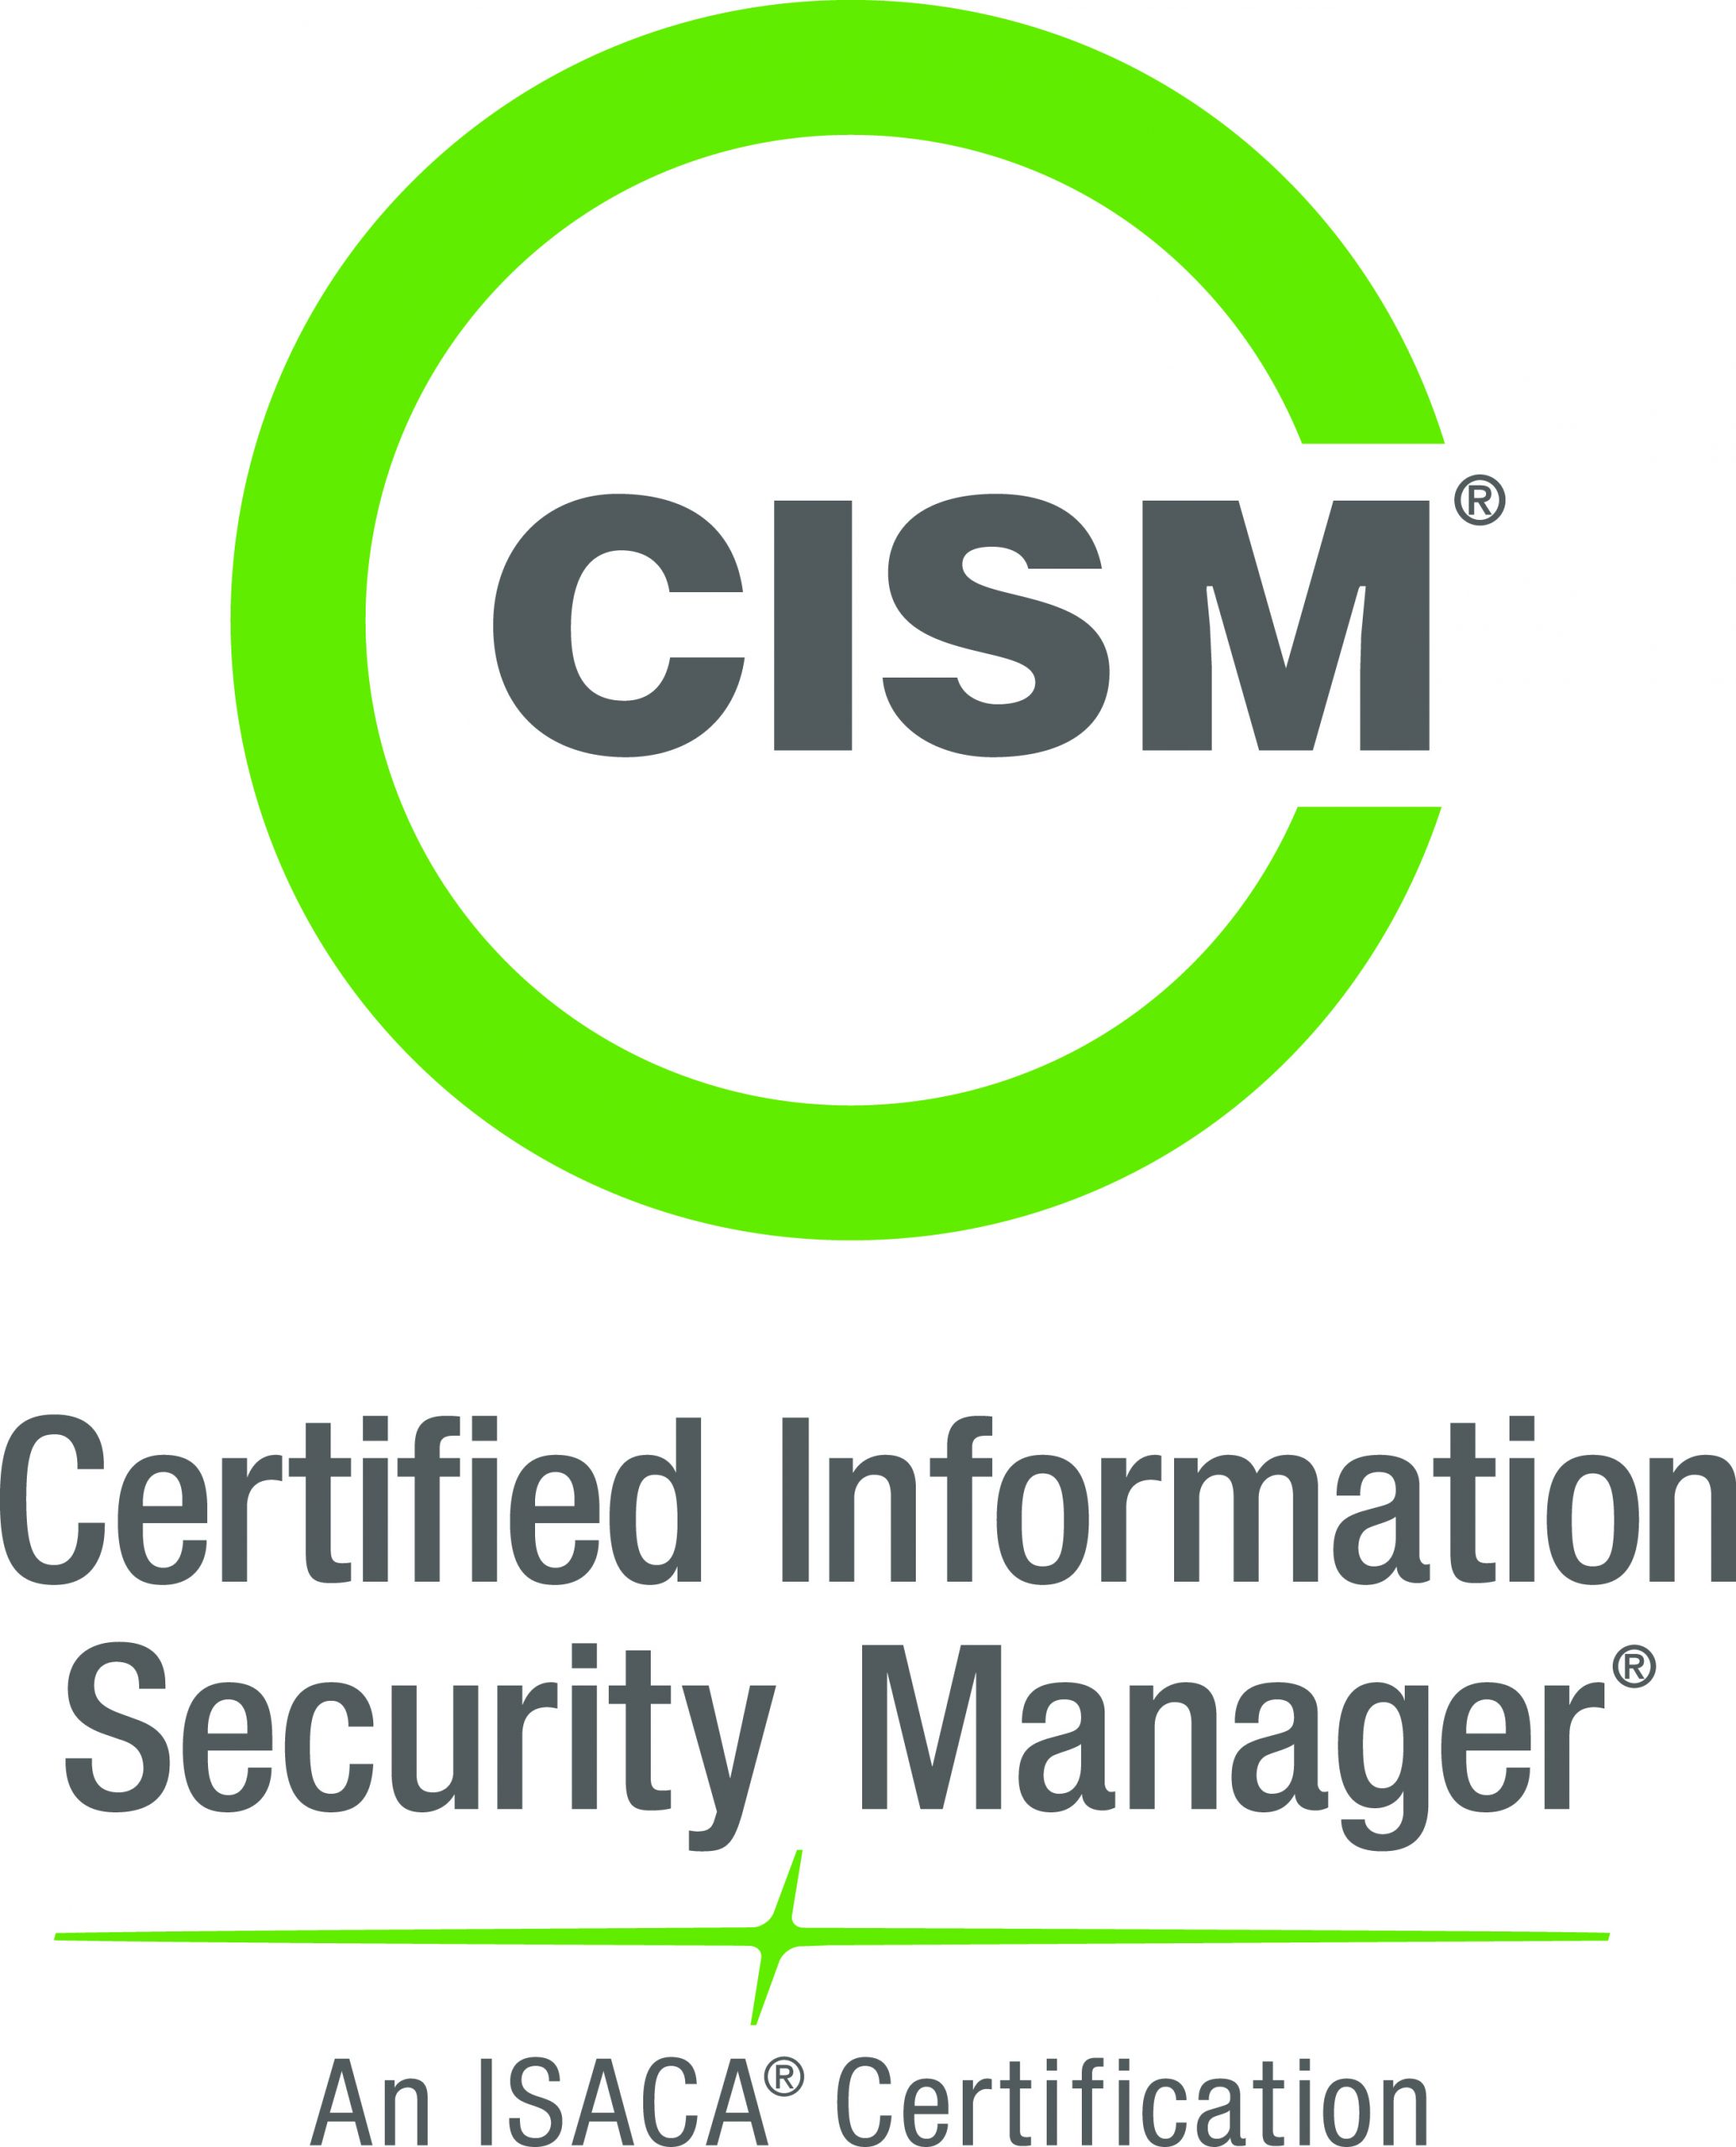 Certified Information Security Manager, CISM